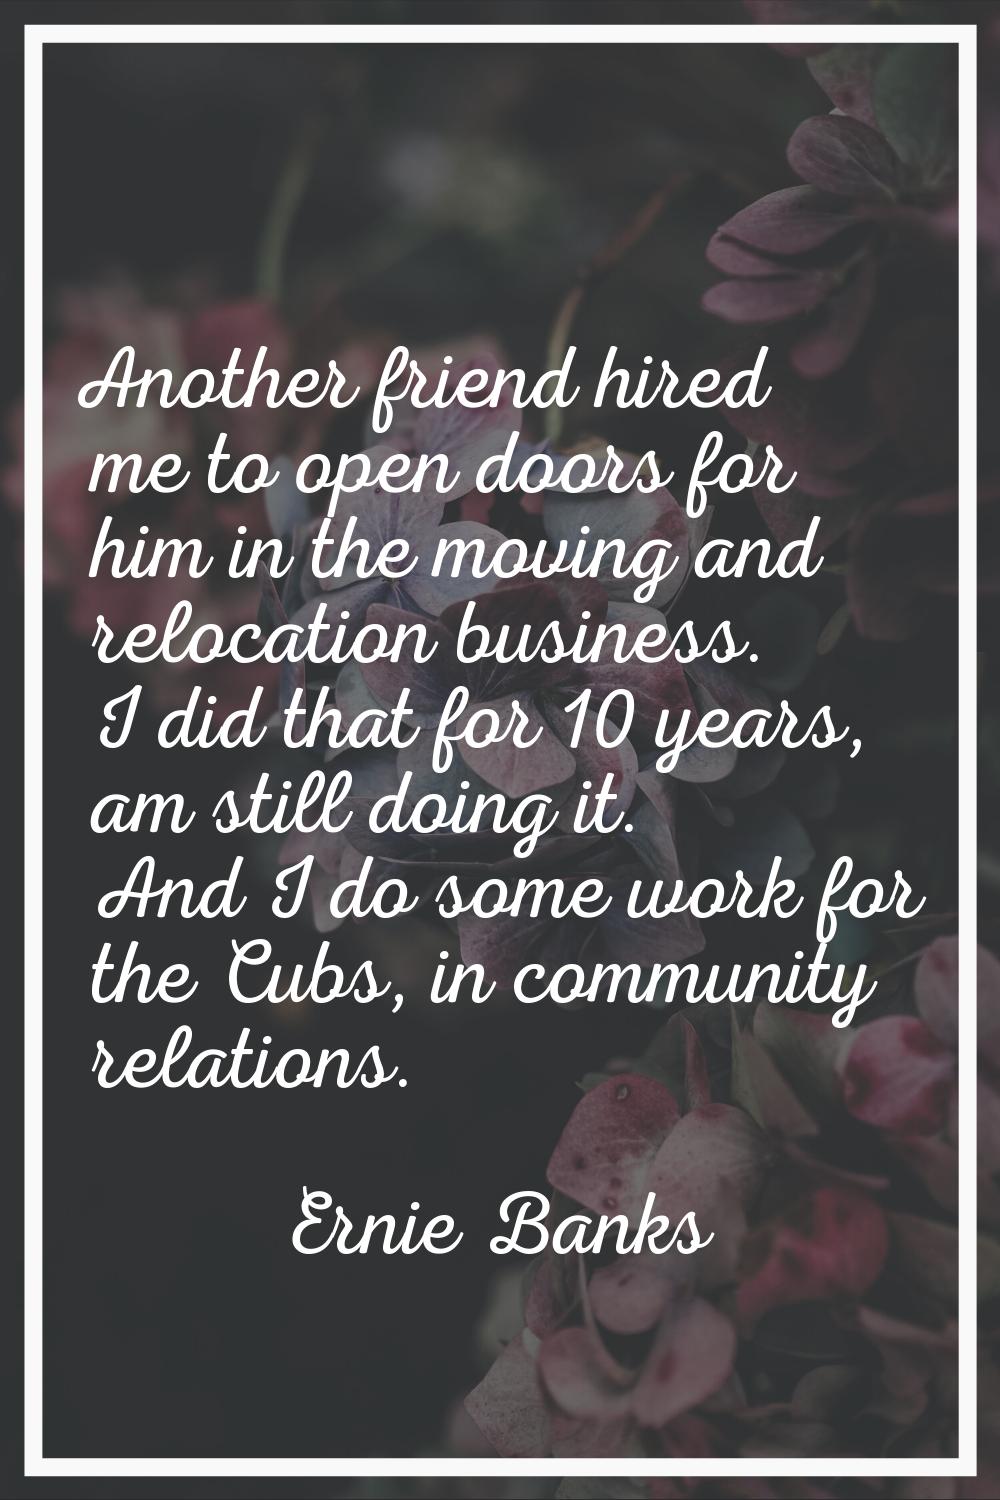 Another friend hired me to open doors for him in the moving and relocation business. I did that for